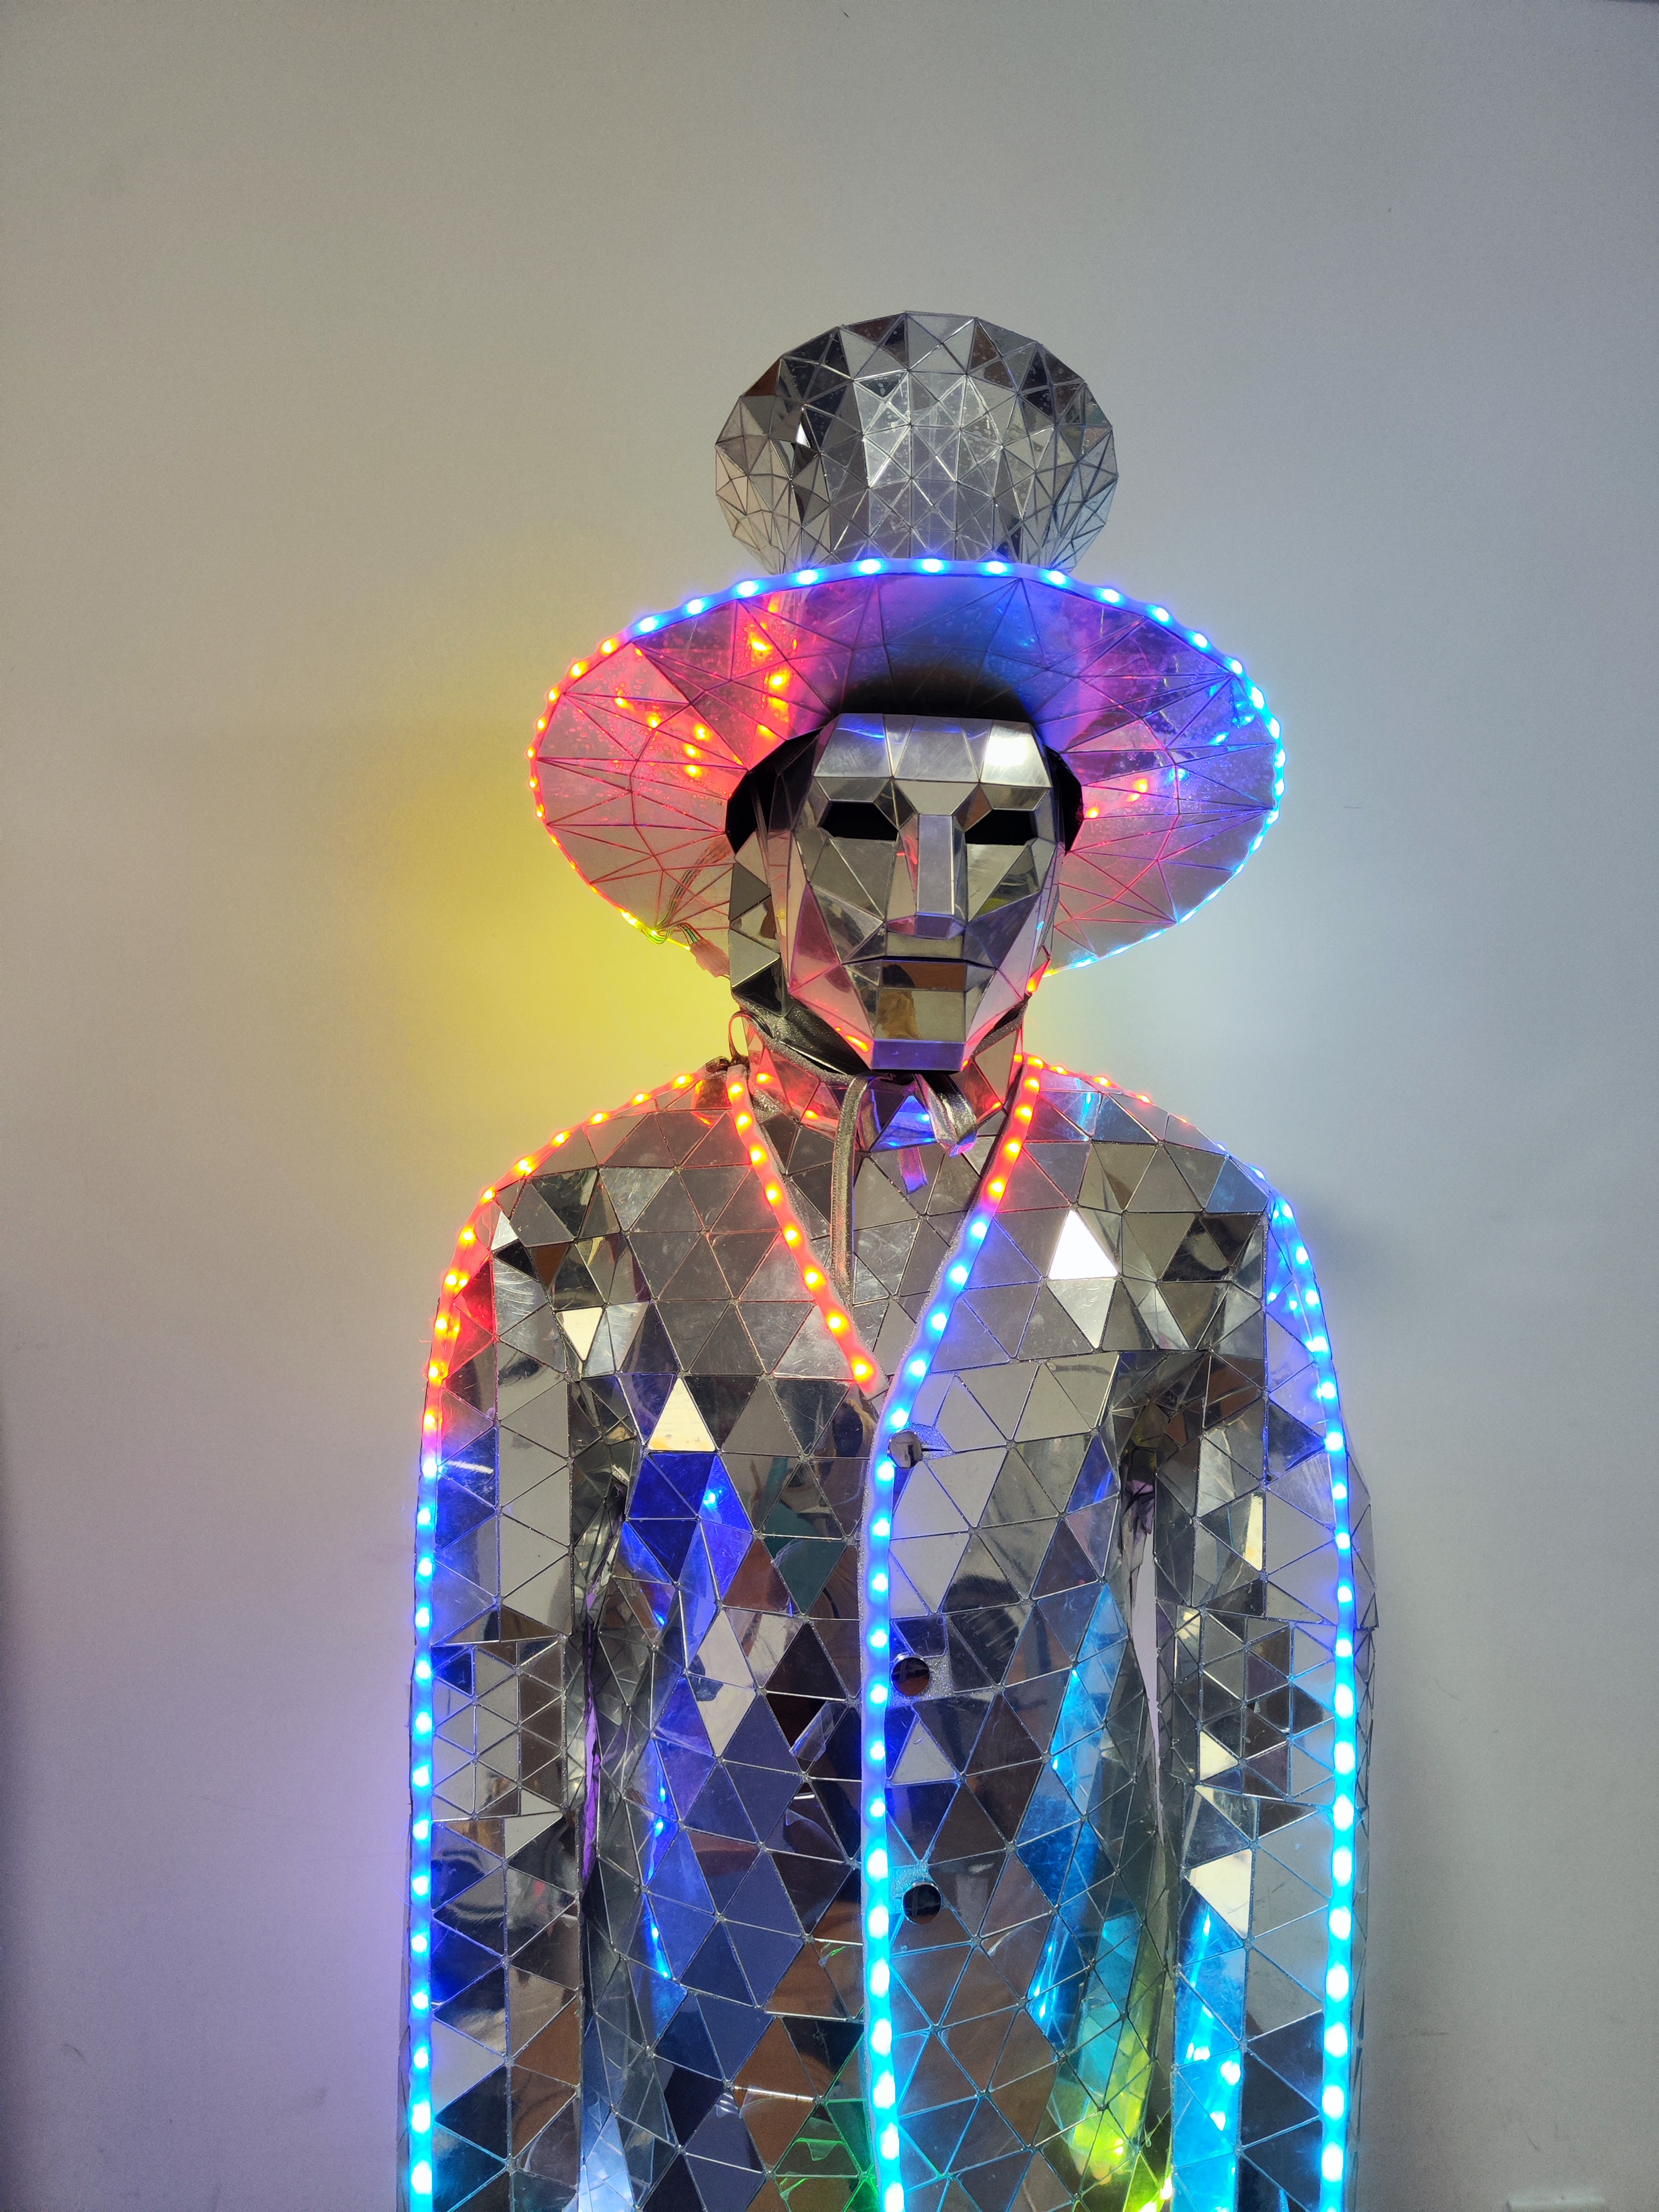 LED mirror man costumw with high hat